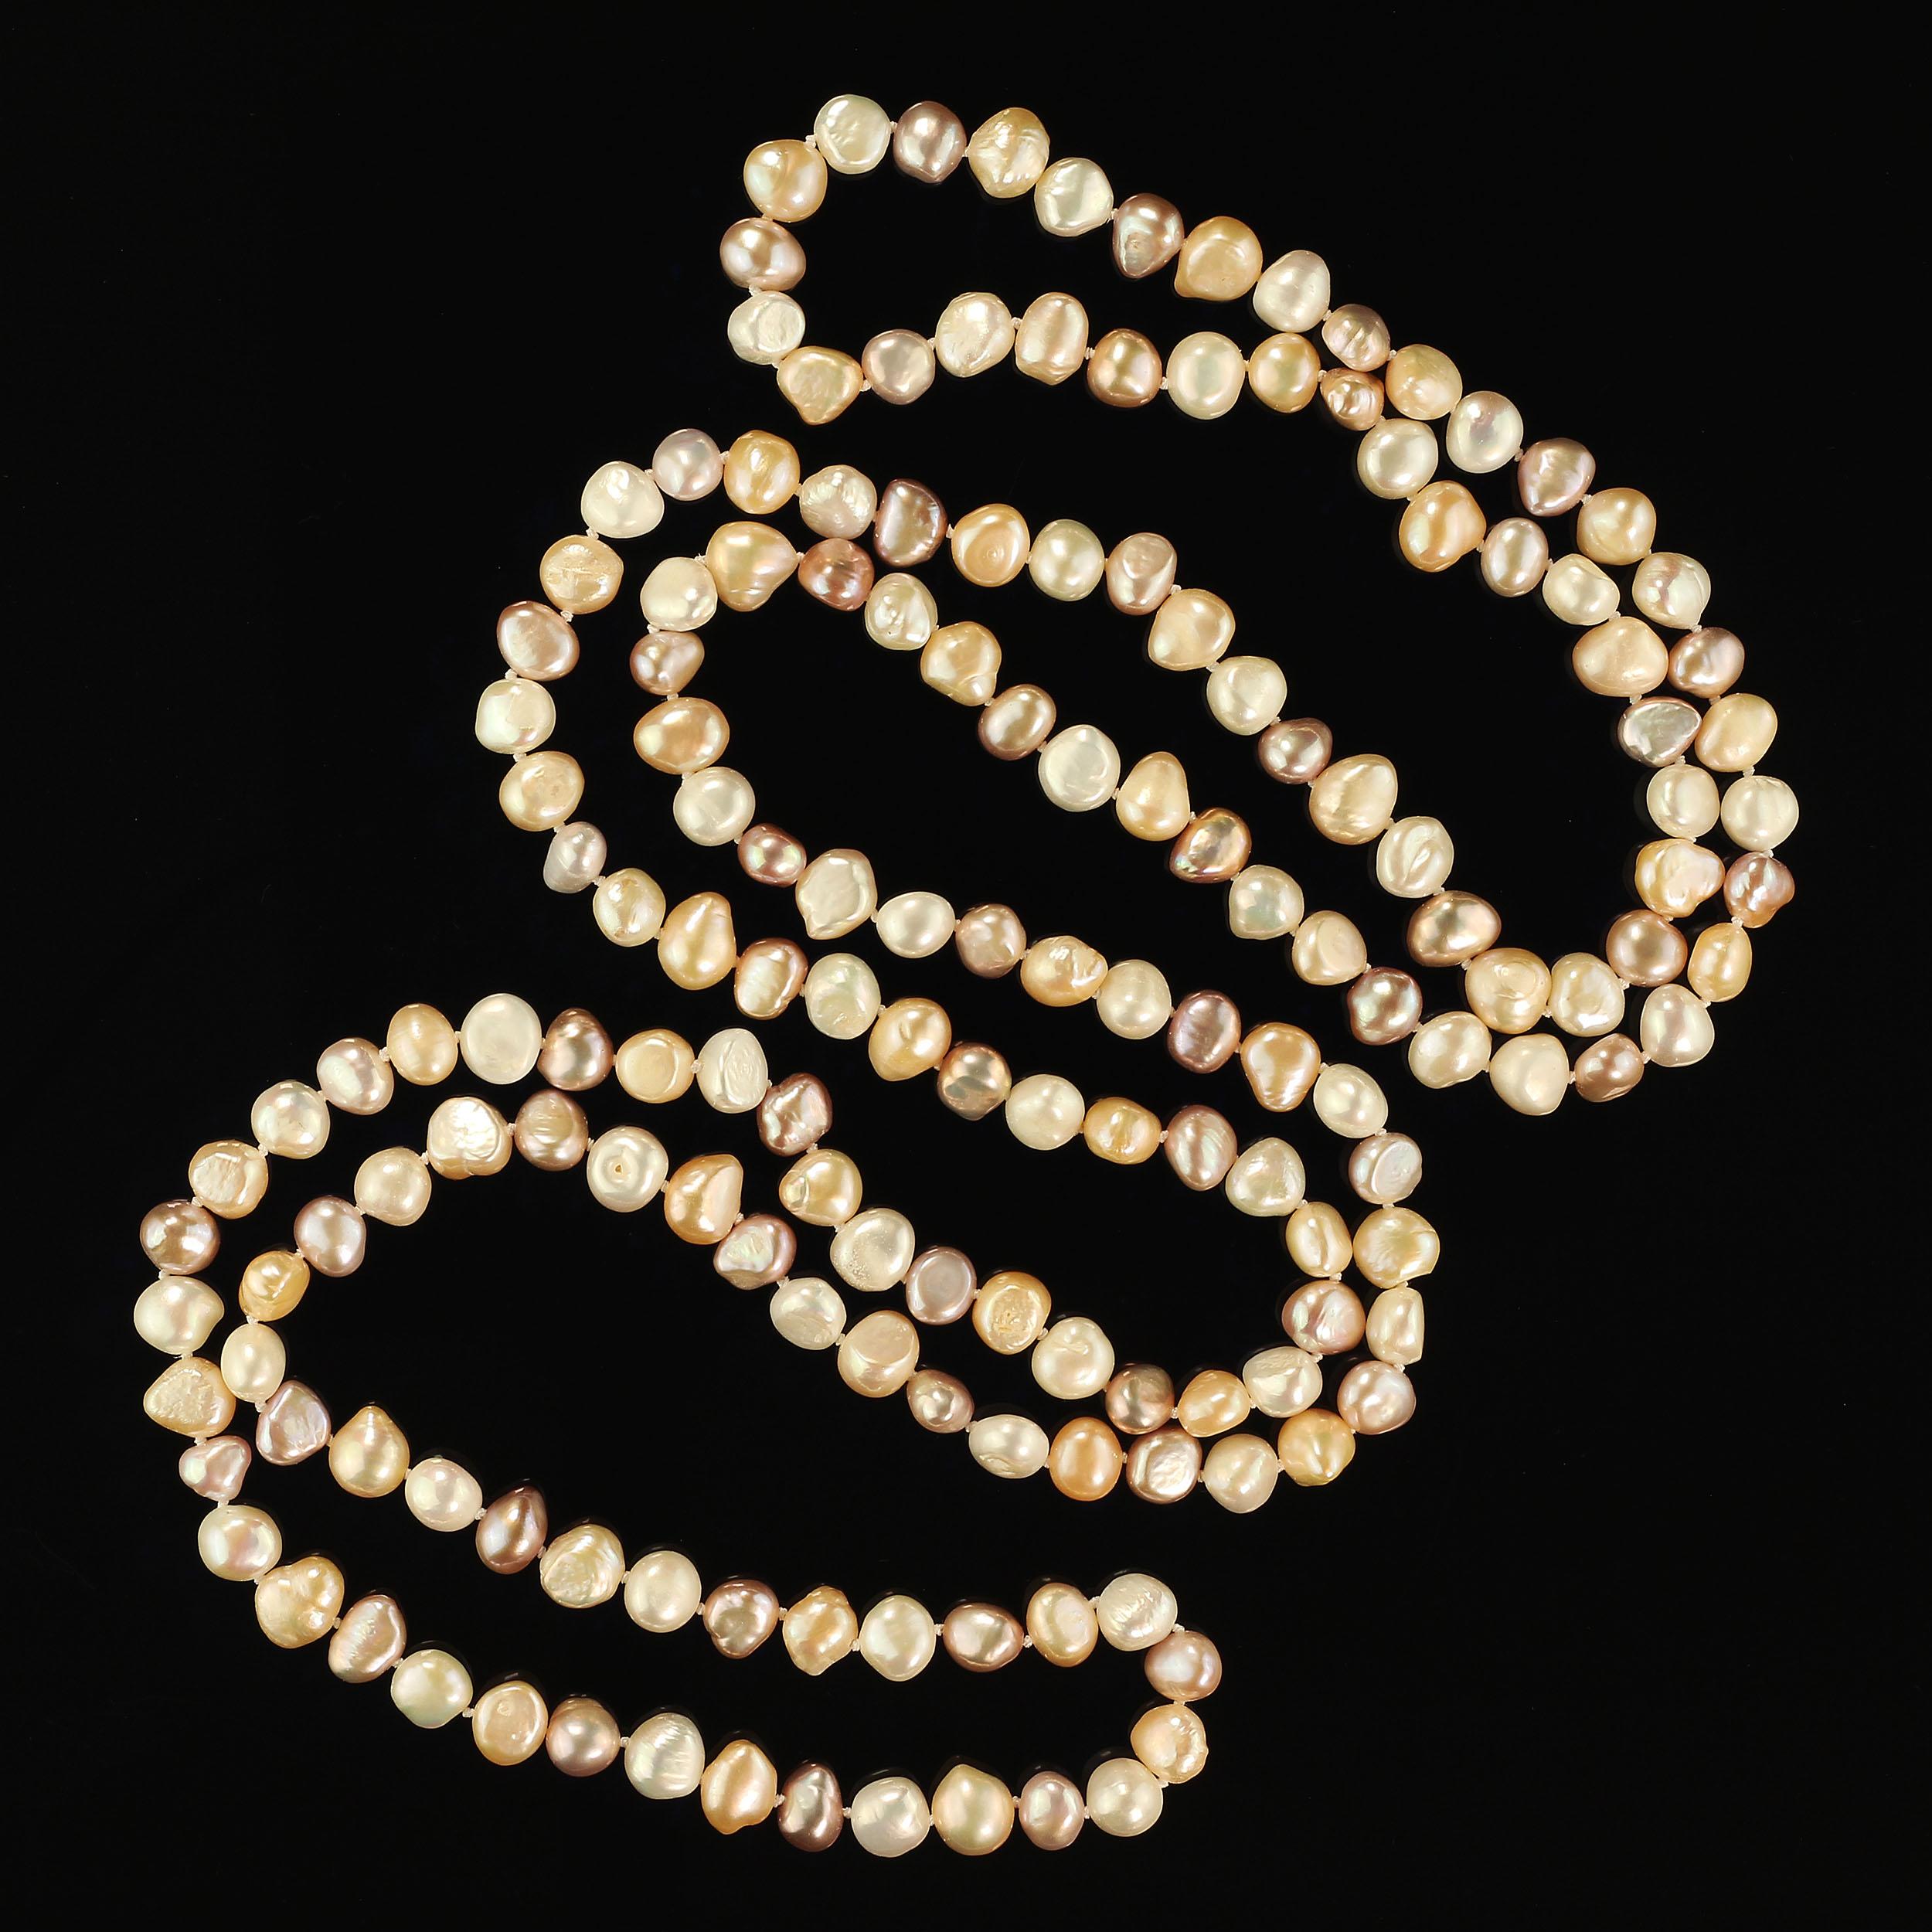 Bead AJD 60 Continuous Inches of Gorgeous Pearls June birthstone  Great Gift!!